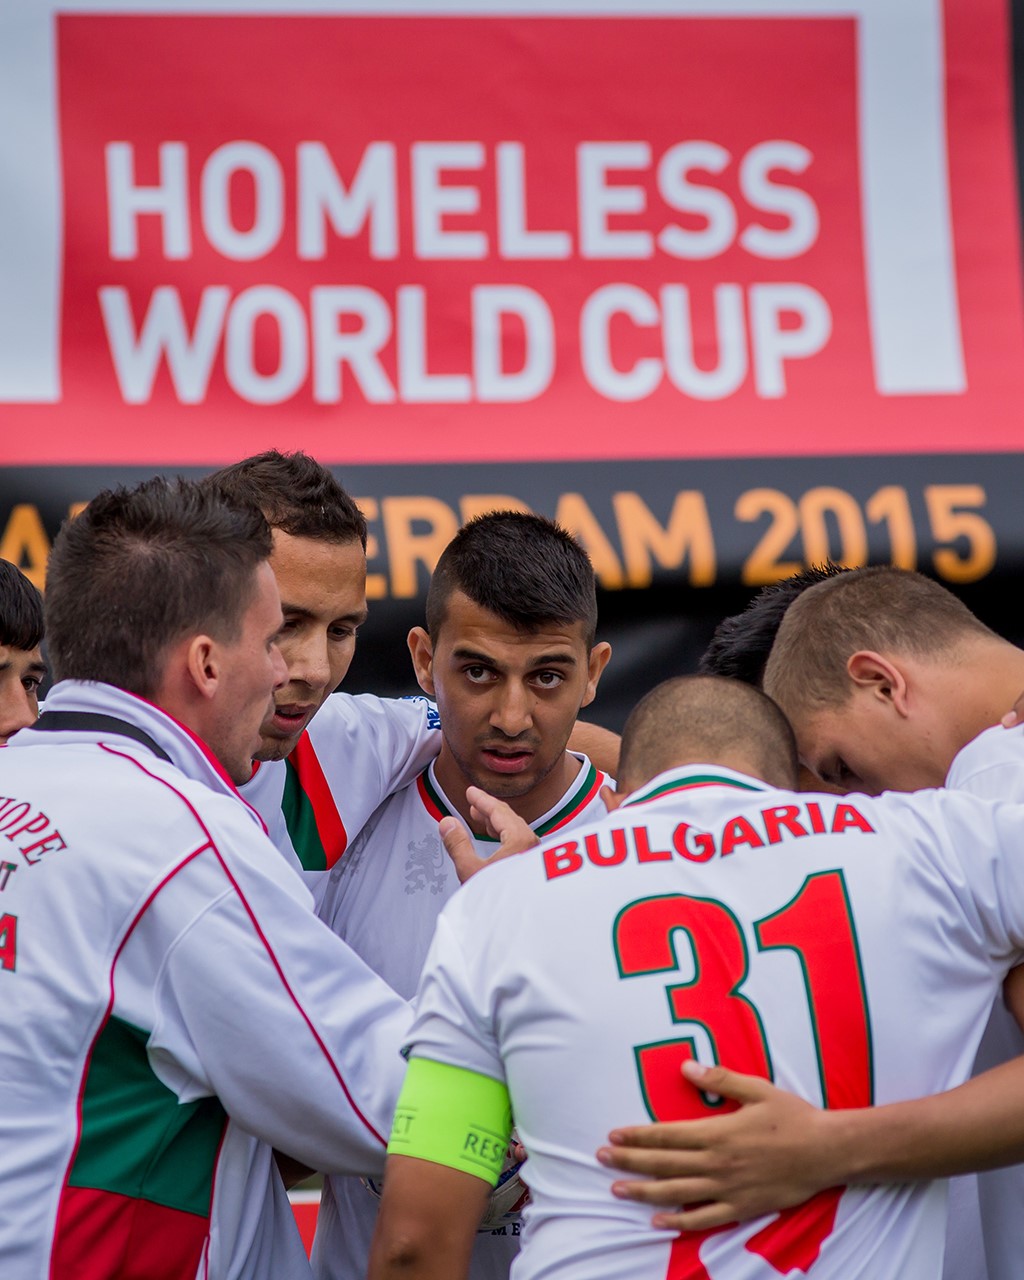 Homeless World Cup players embrace during a game. 